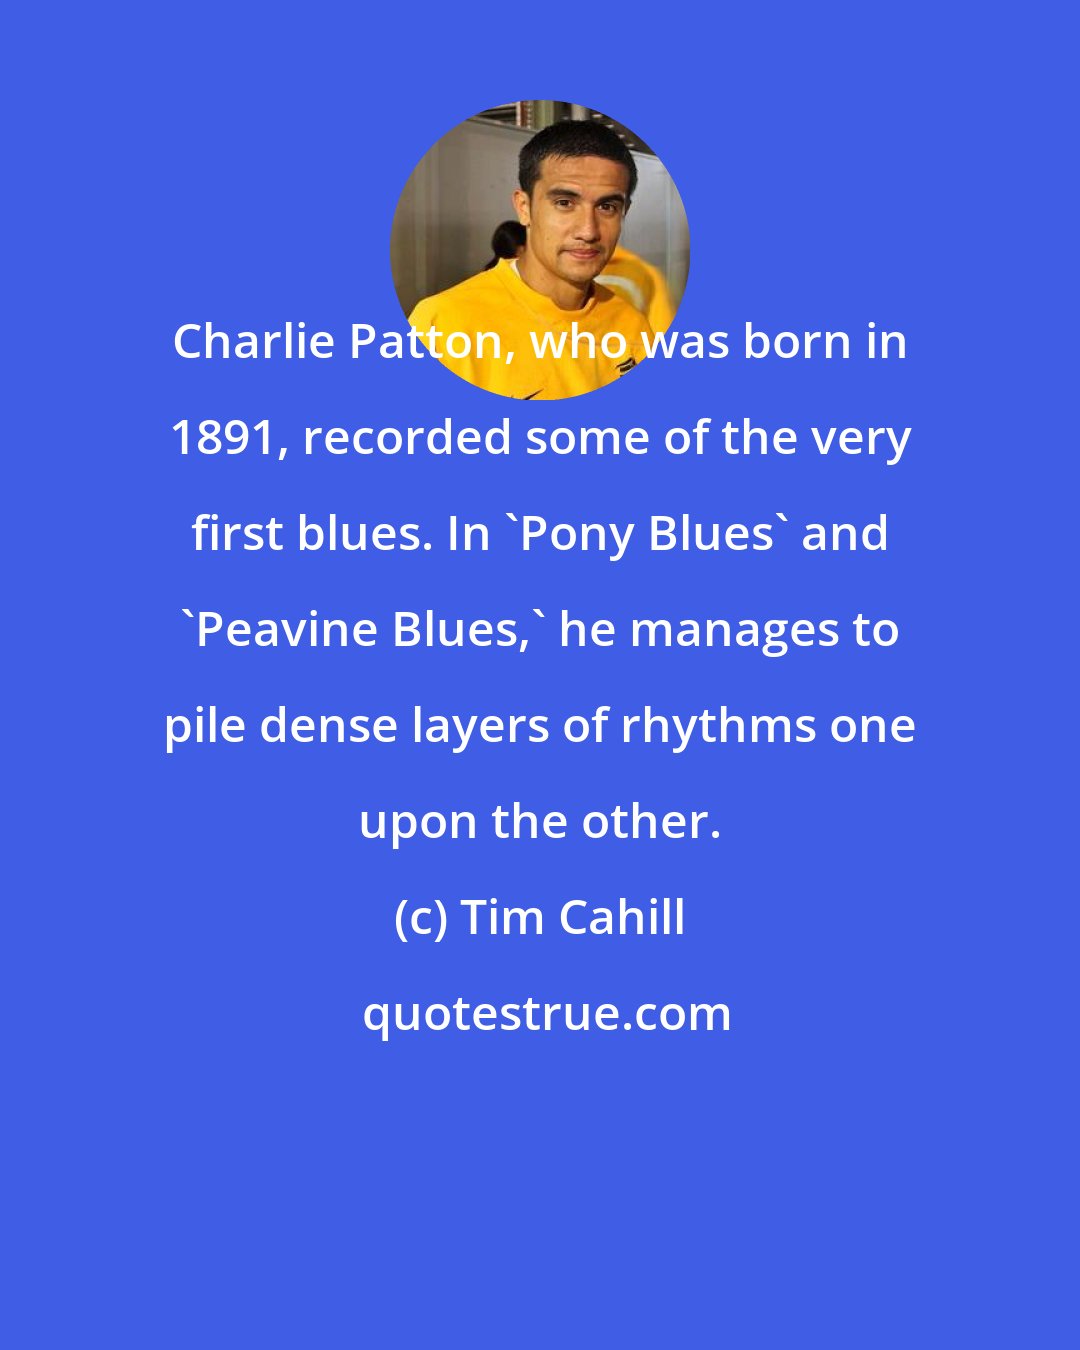 Tim Cahill: Charlie Patton, who was born in 1891, recorded some of the very first blues. In 'Pony Blues' and 'Peavine Blues,' he manages to pile dense layers of rhythms one upon the other.